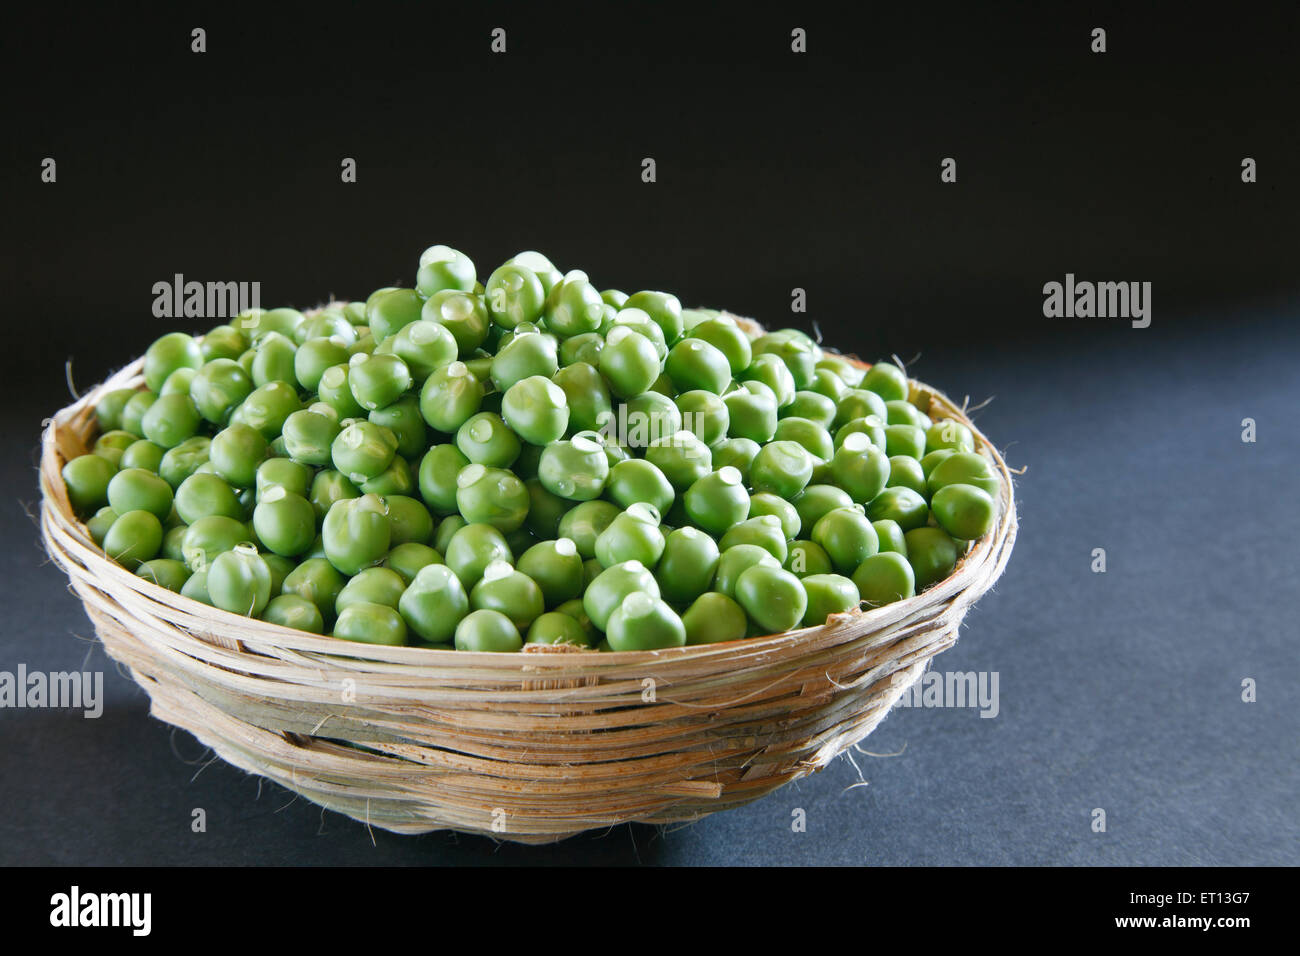 Green peas in cane basket on black background Stock Photo